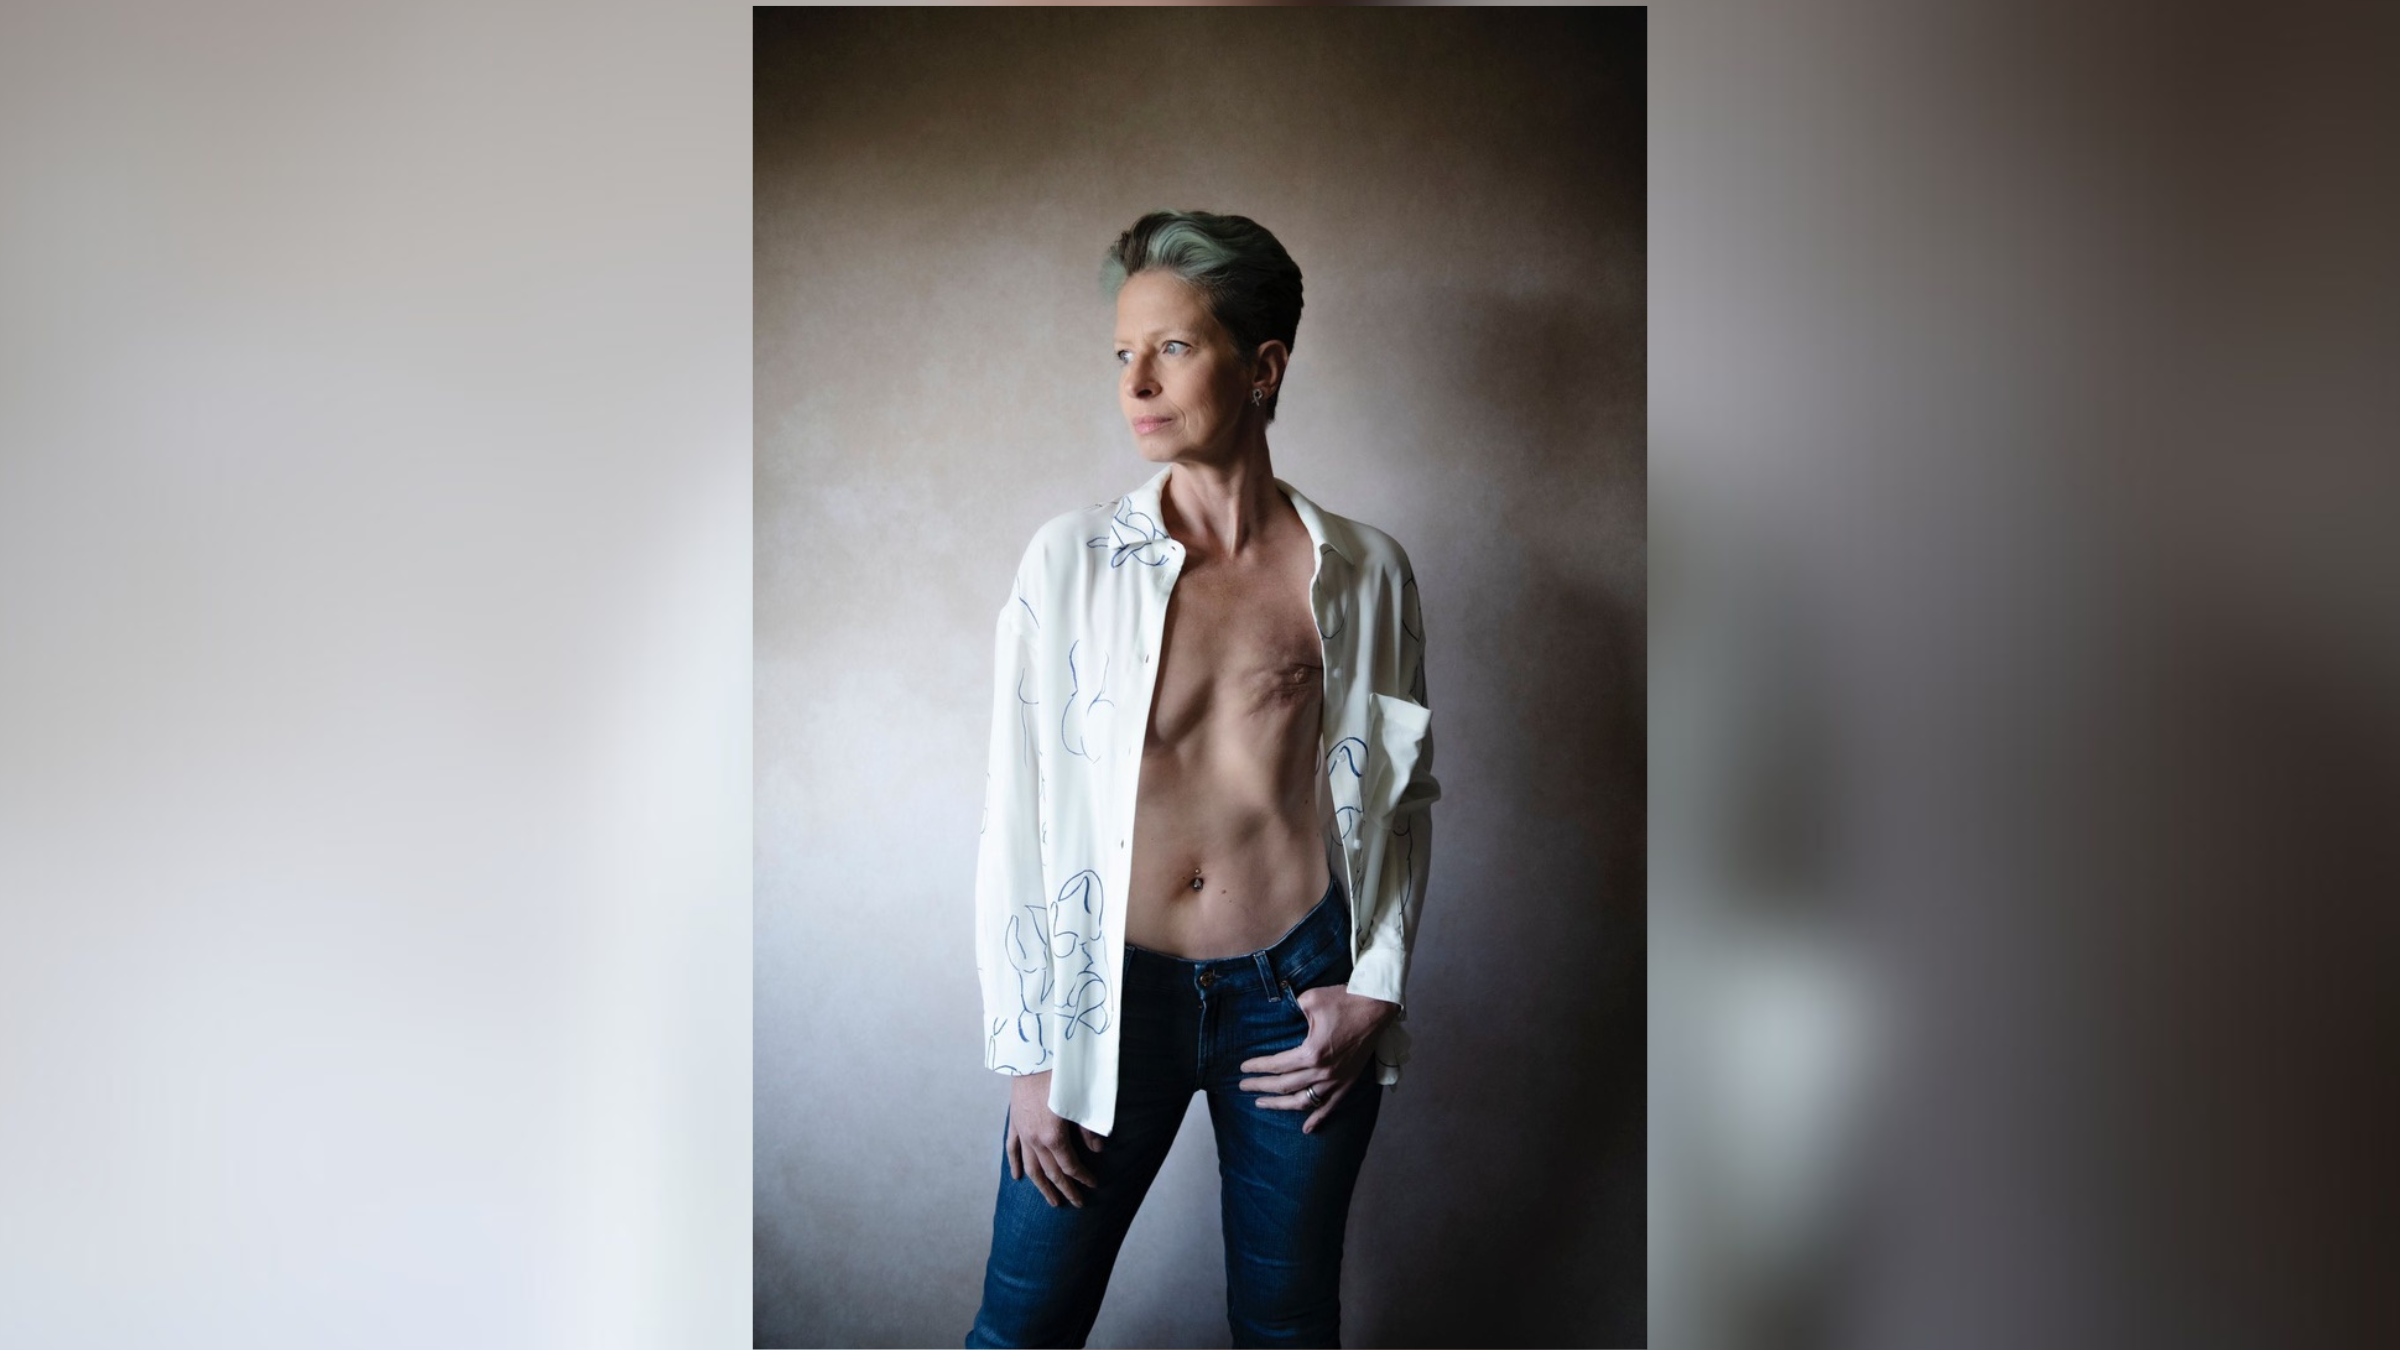 Portrait of Liz O'Riordan with her shirt unbuttoned to reveal her healed breasts after a mastectomy